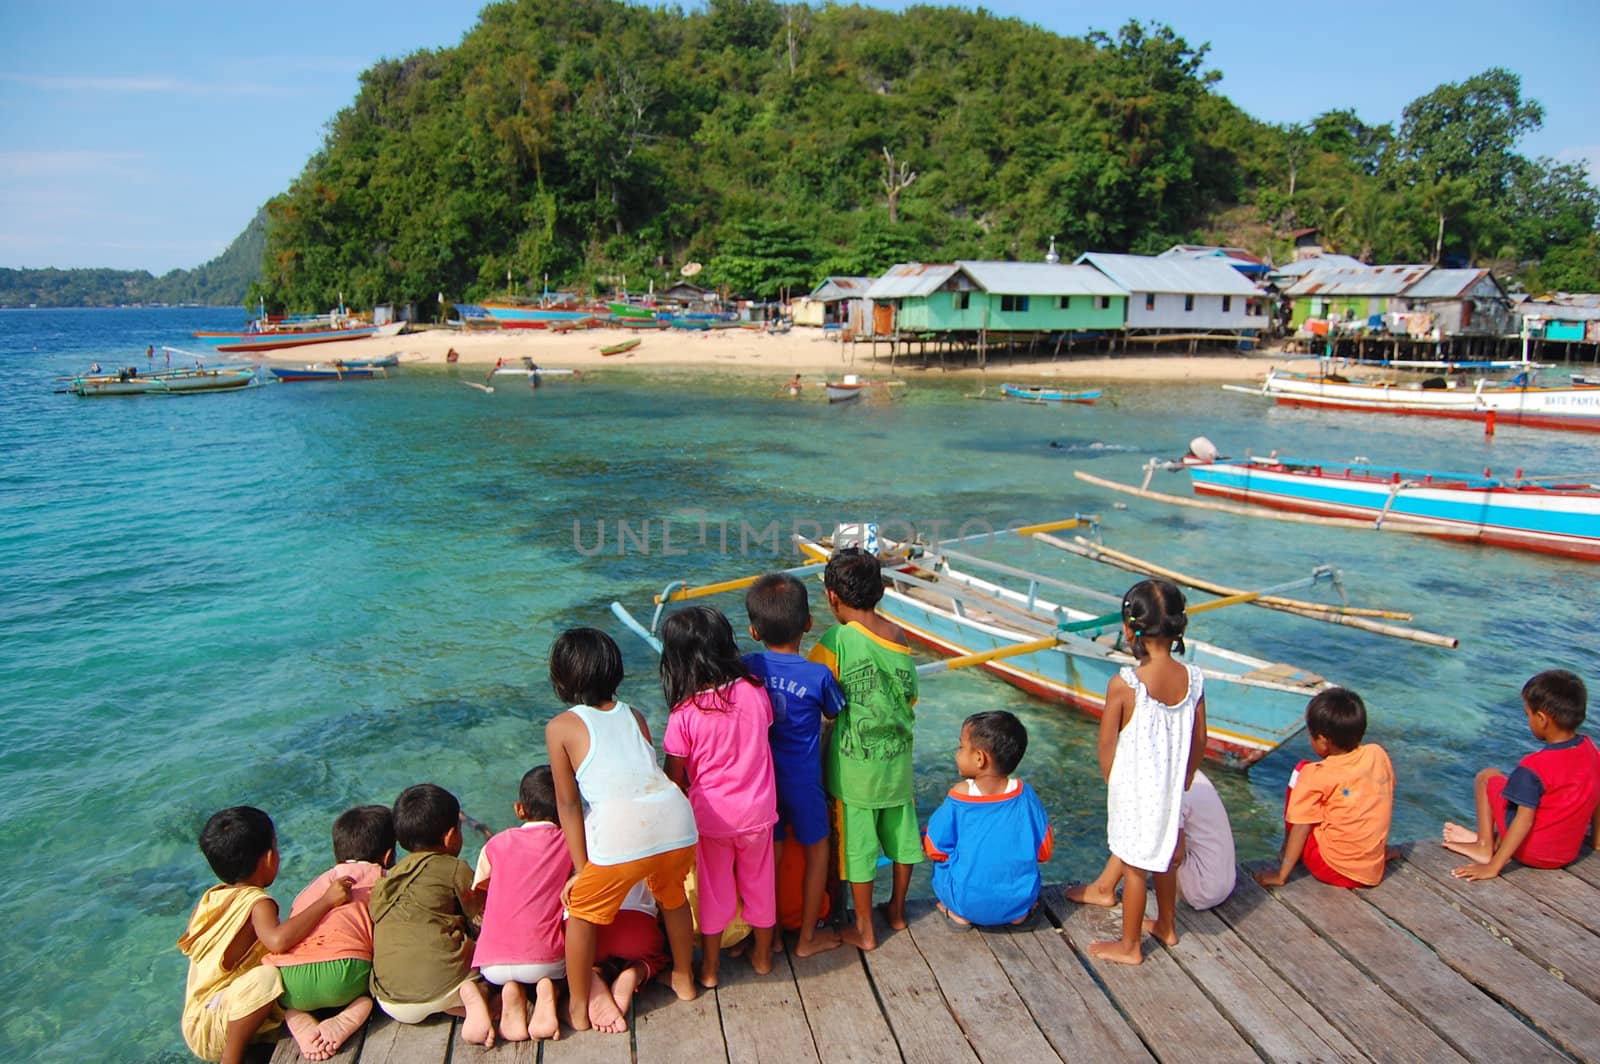 Children at timber pier look to the sea by danemo